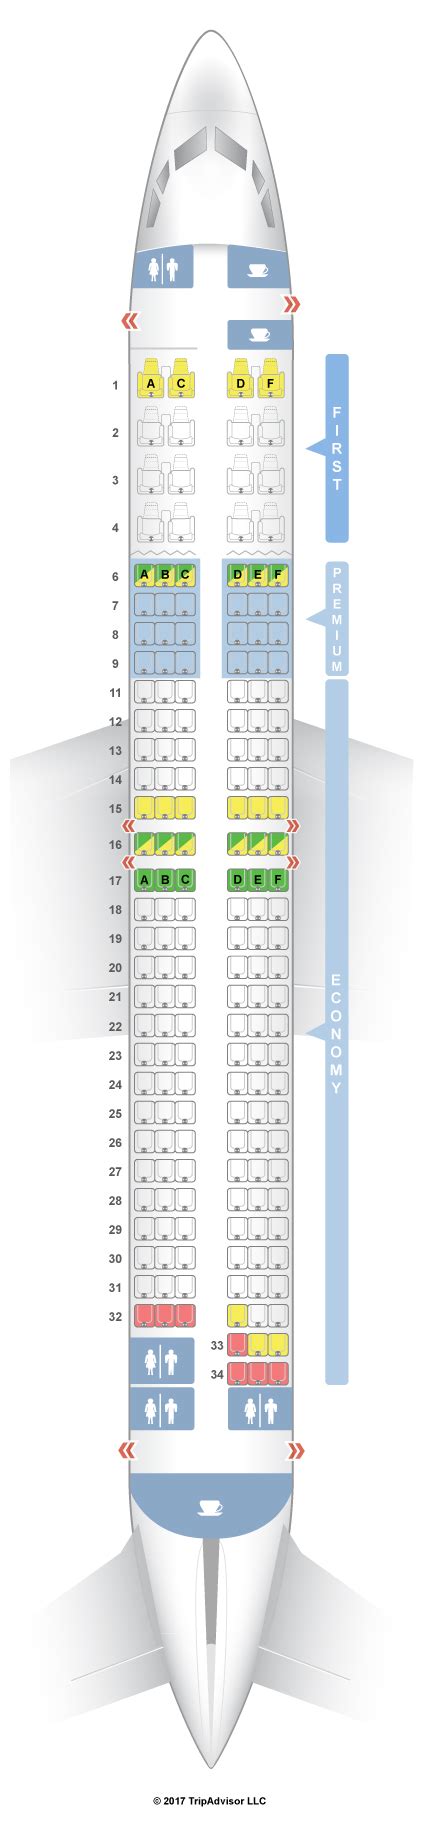 Click any seat for more information. Key. For your next Alaska Airlines flight, use this seating chart to get the most comfortable seats, legroom, and recline on .